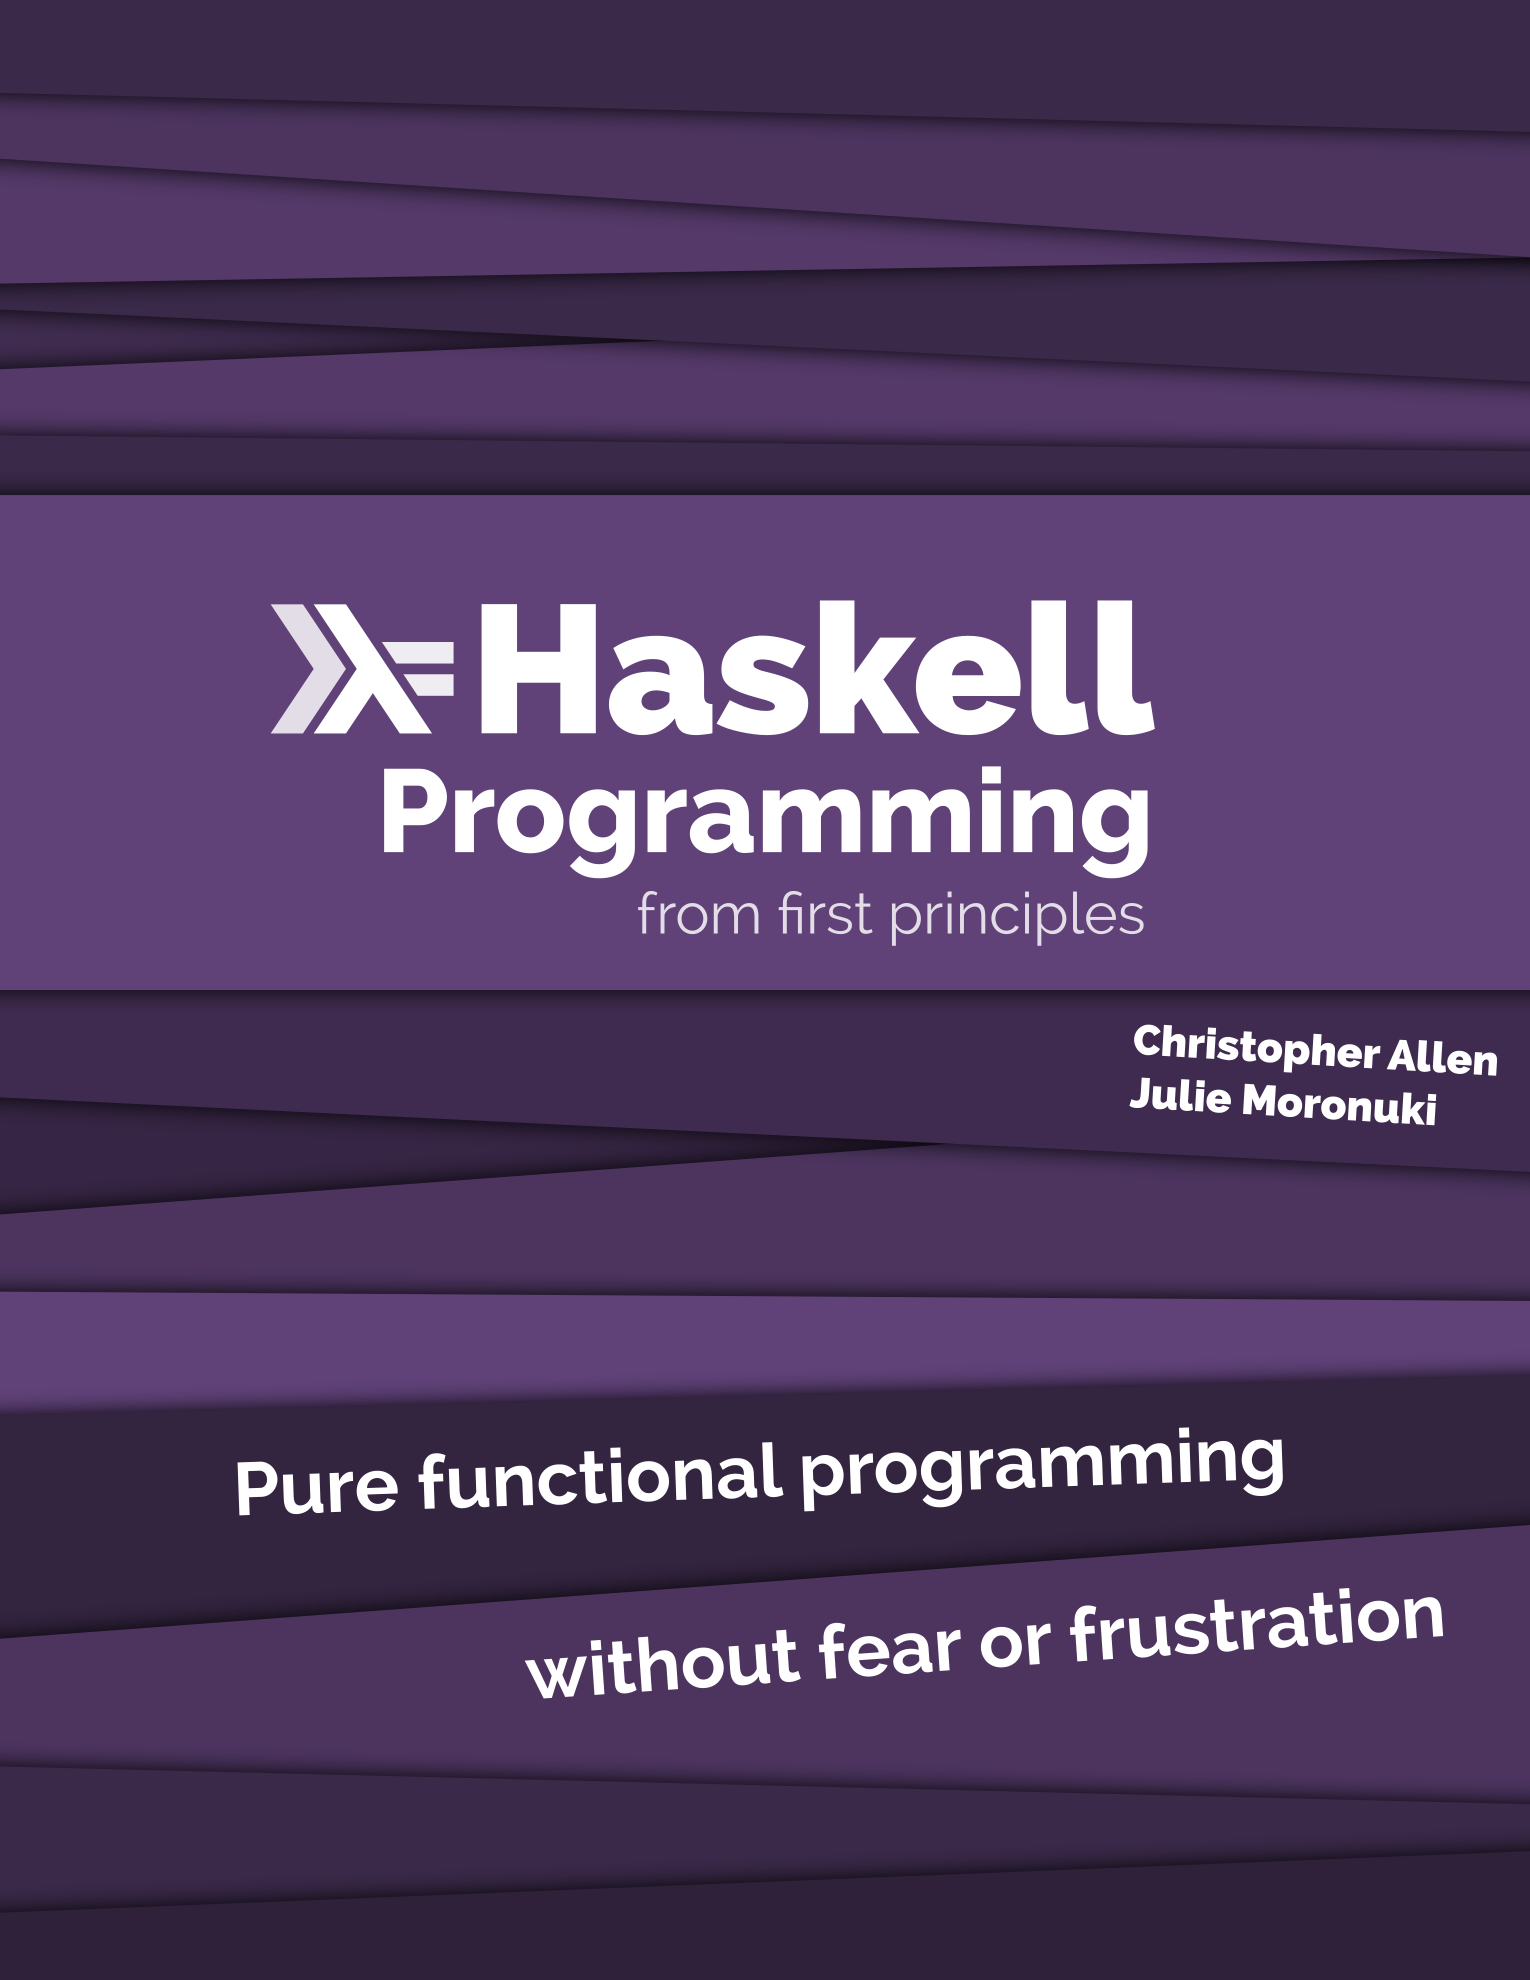 Haskell Programming From First Principles book cover